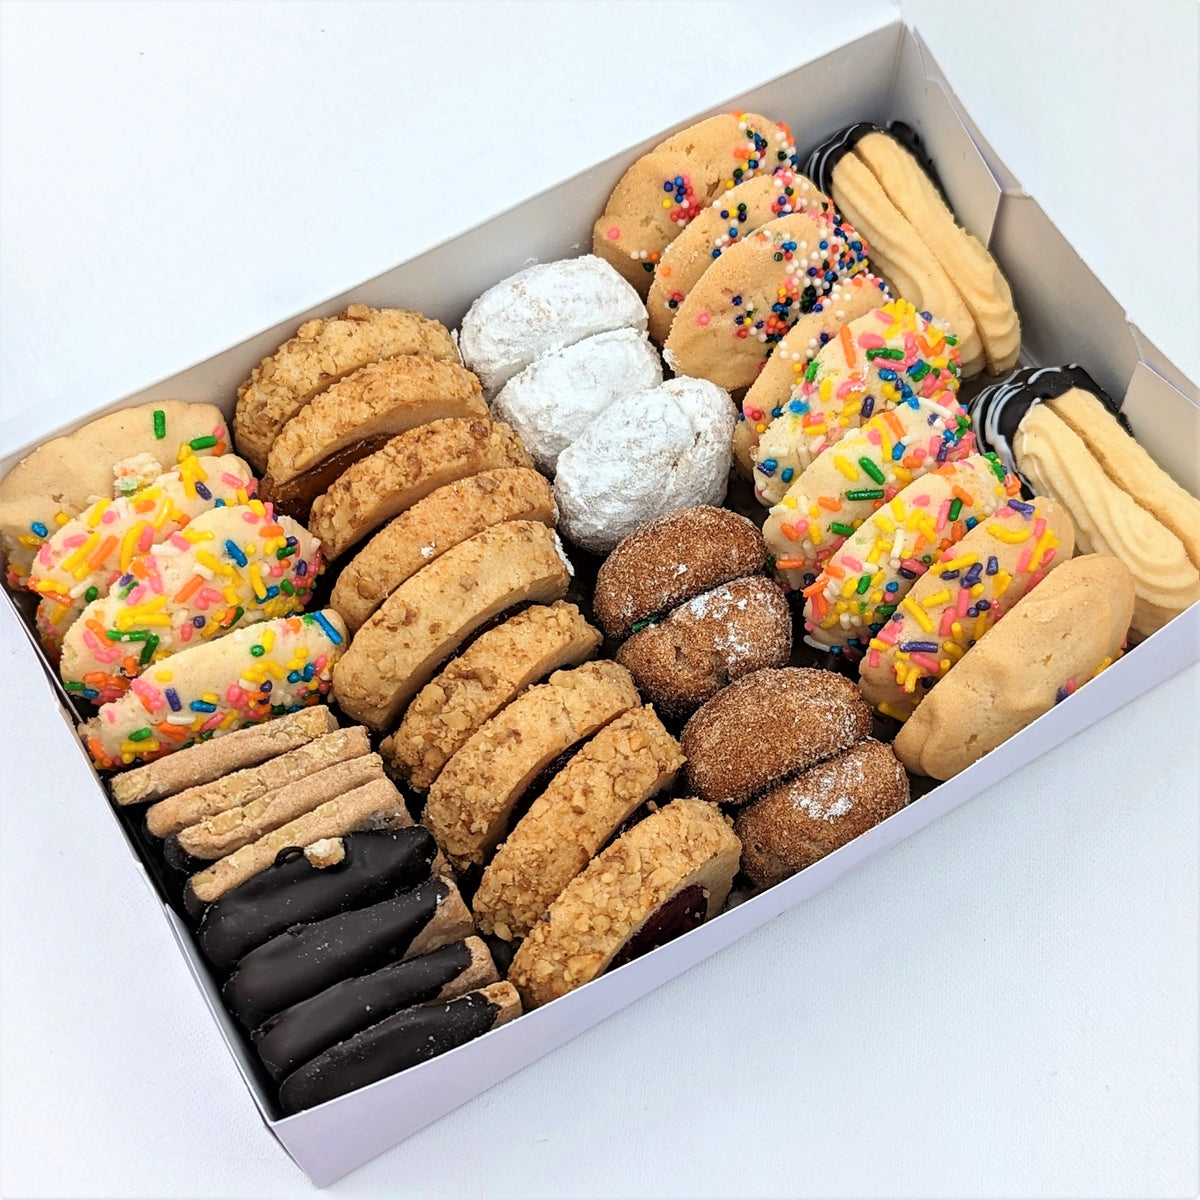 Itancourtfrance 03282020 Box Kinder Cards Cookies Stock Photo